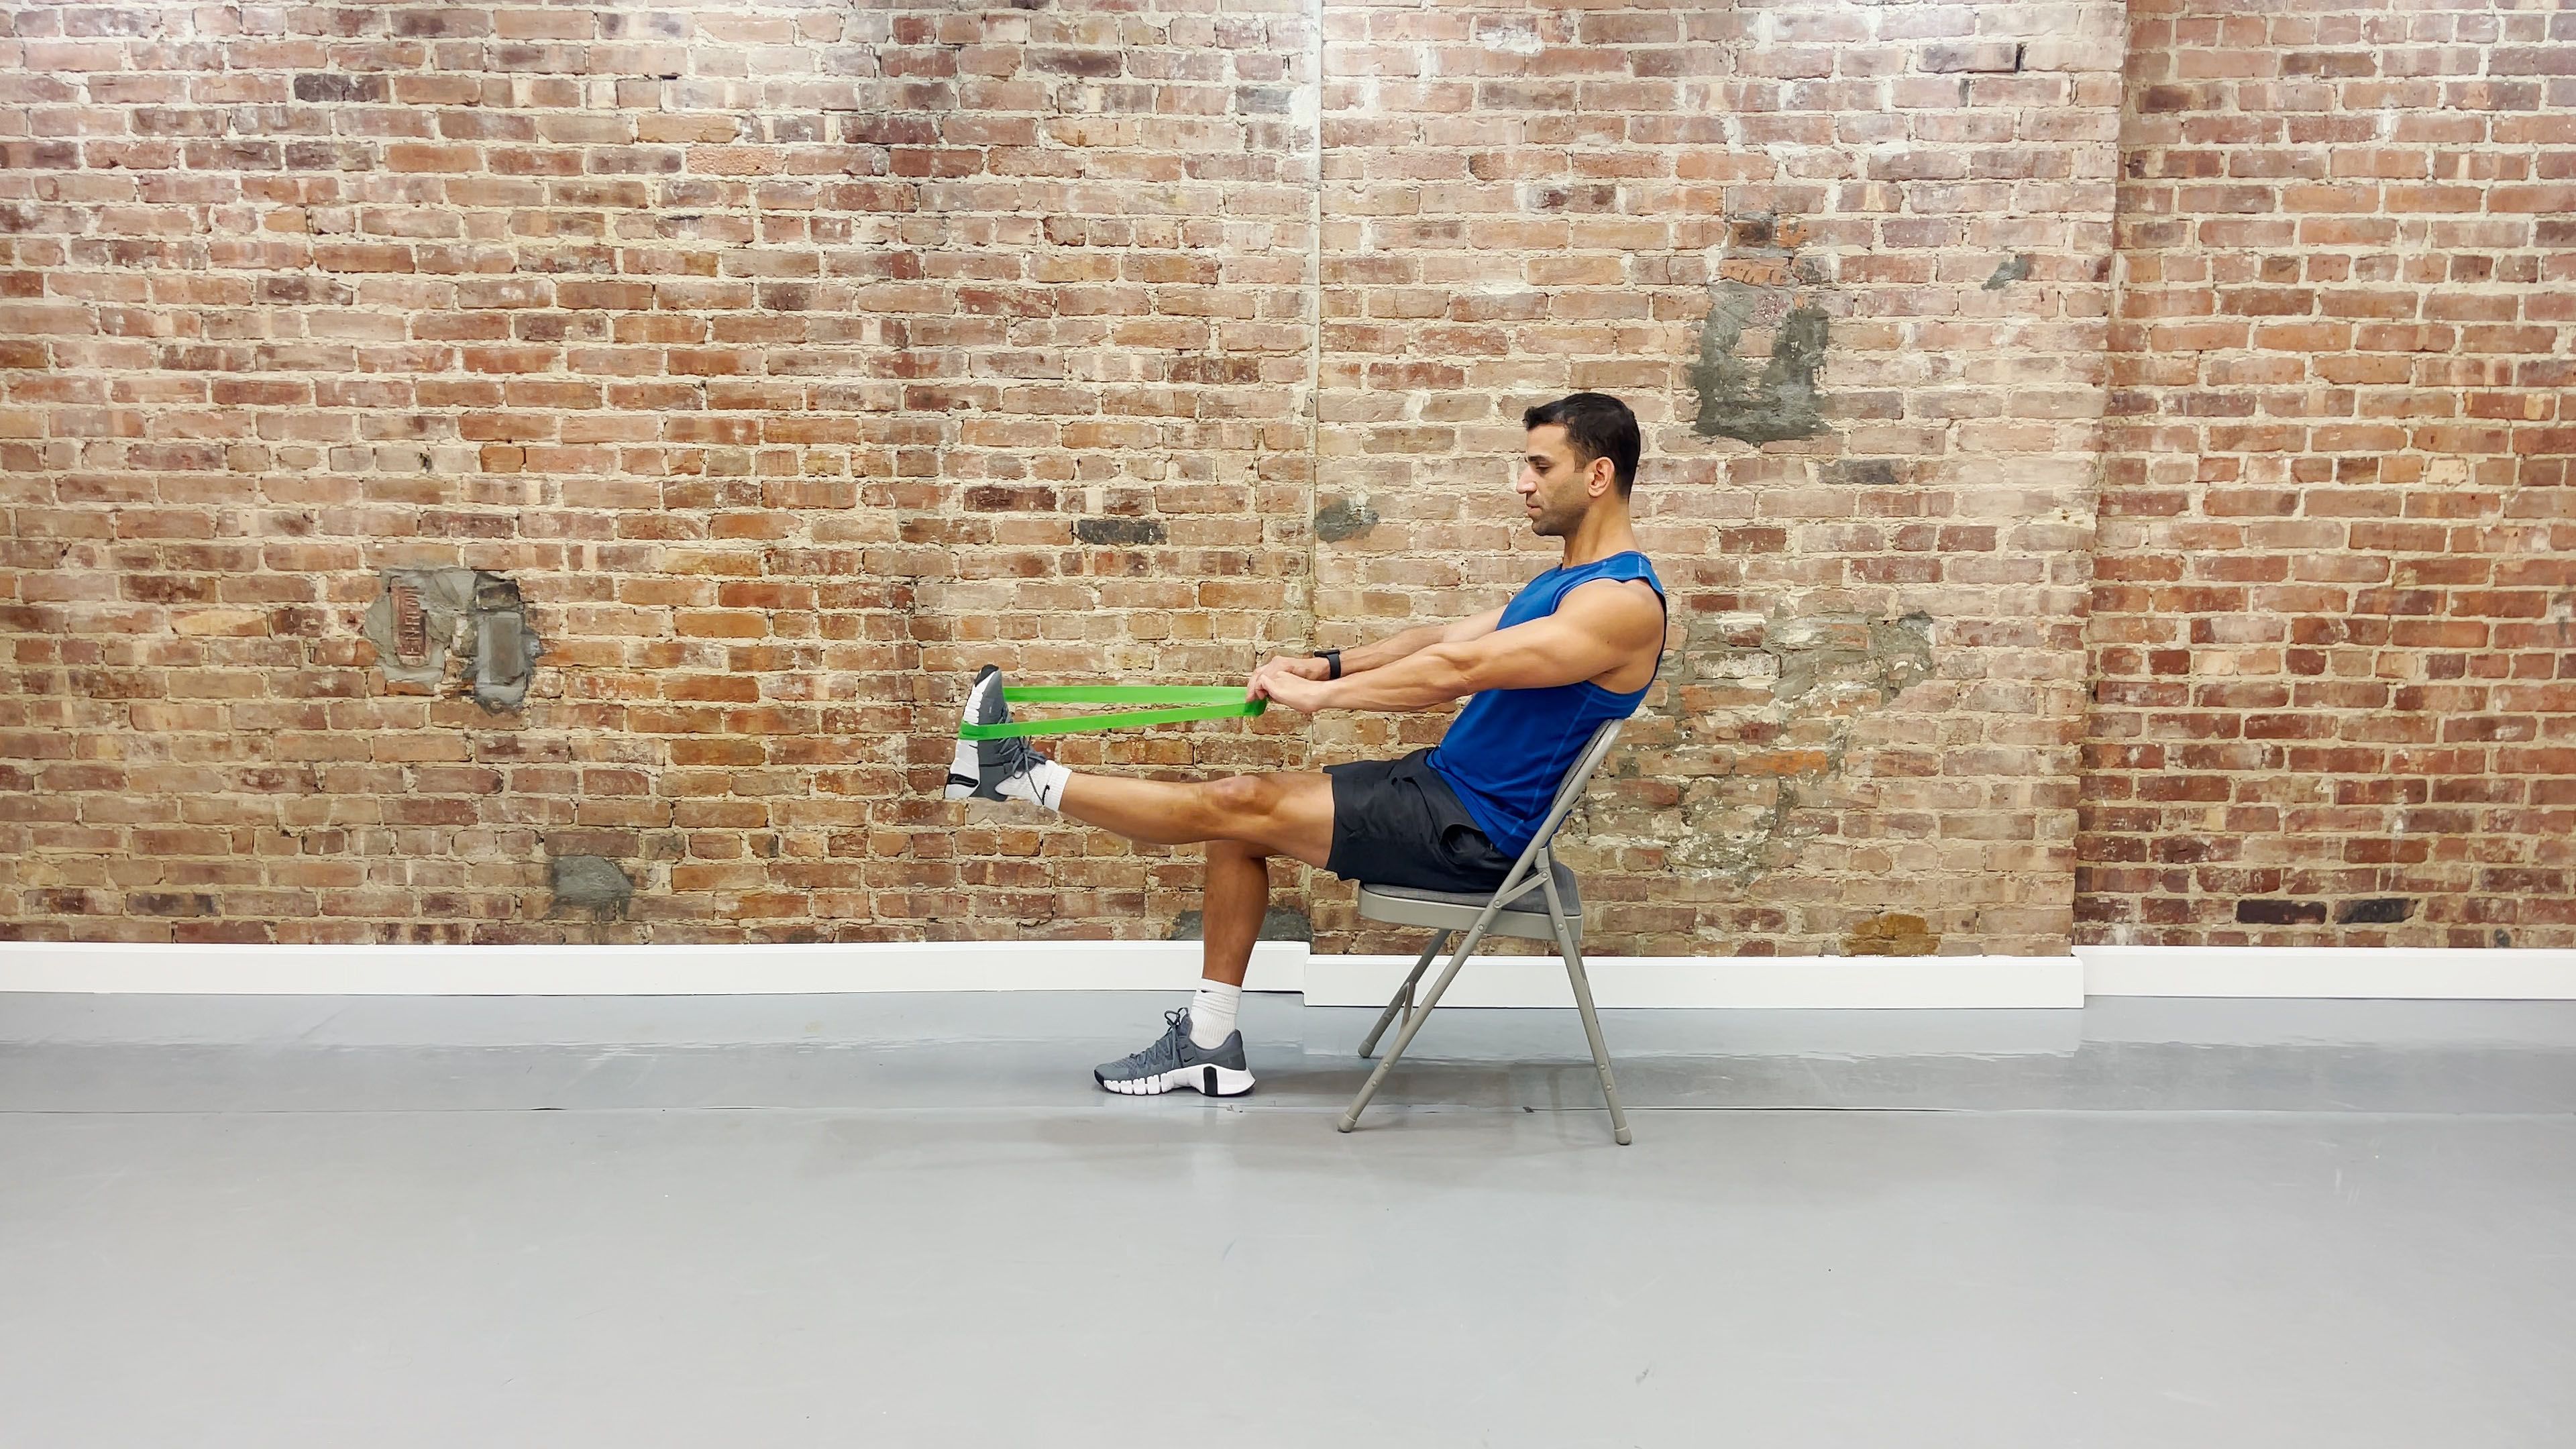 How to Use Resistance Bands for Strength Training - Brick Bodies